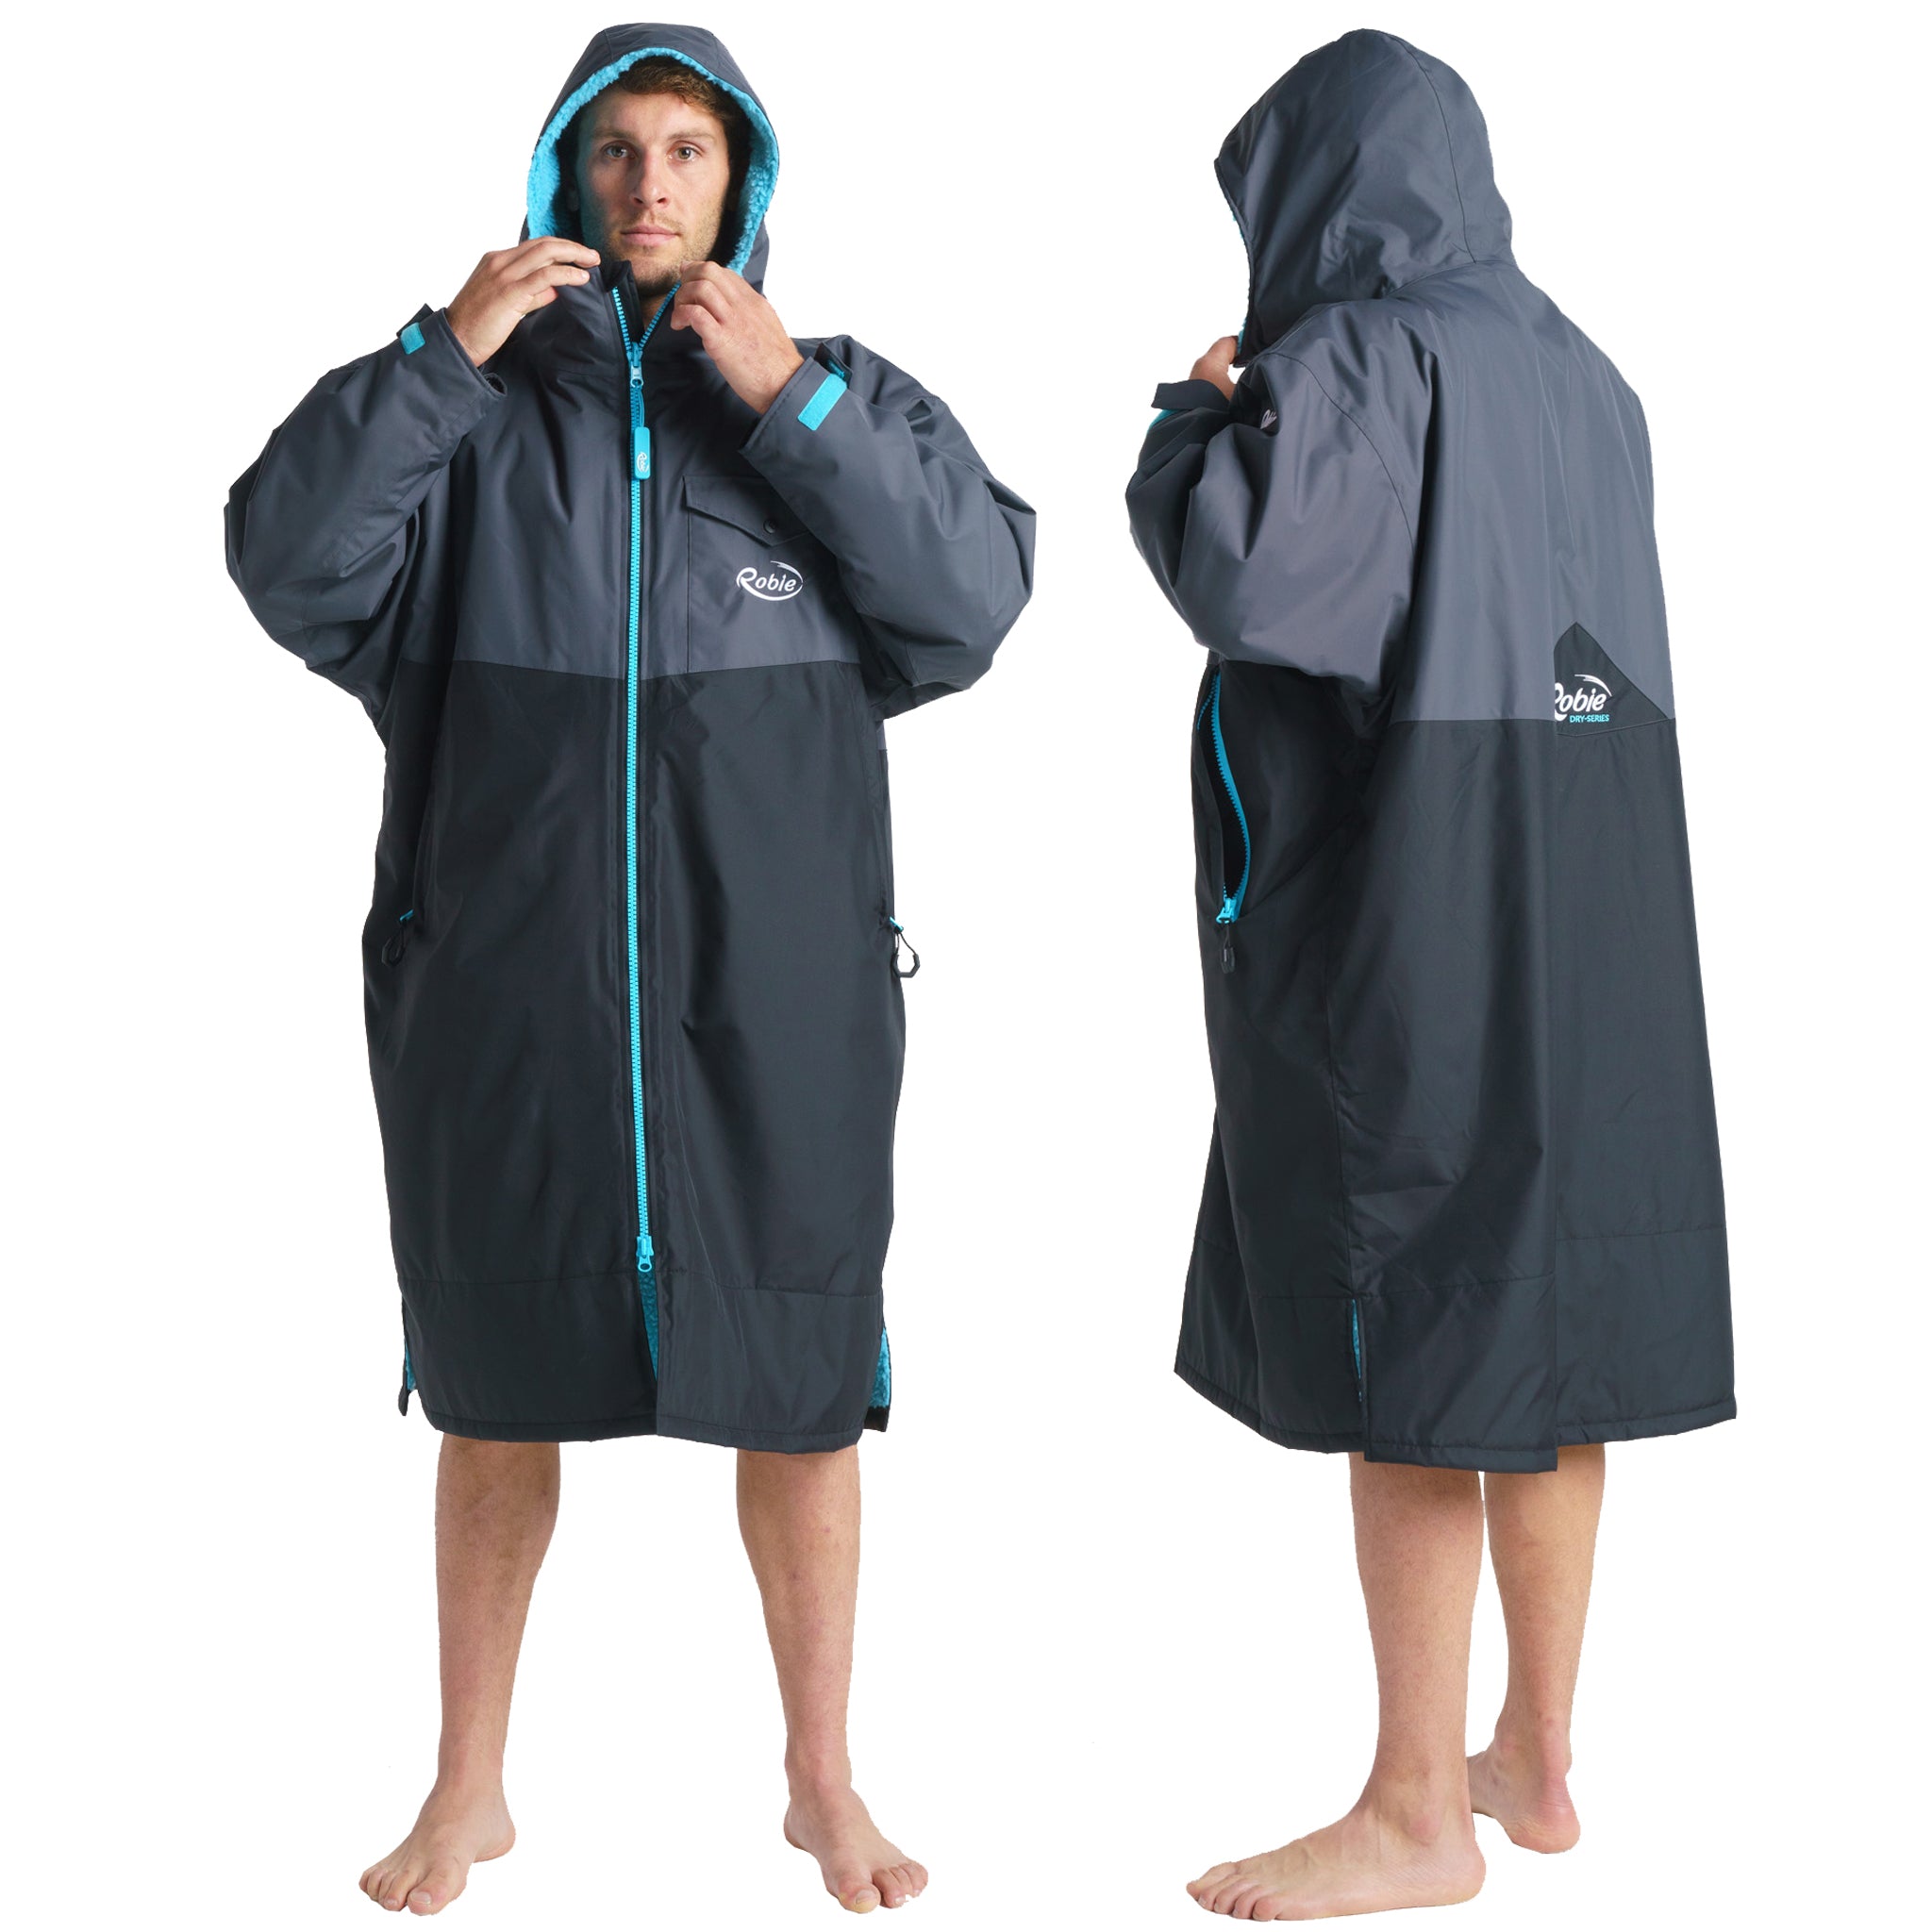 Robie Dry Series Changing Robe - Black/Charcoal - Front & Back View